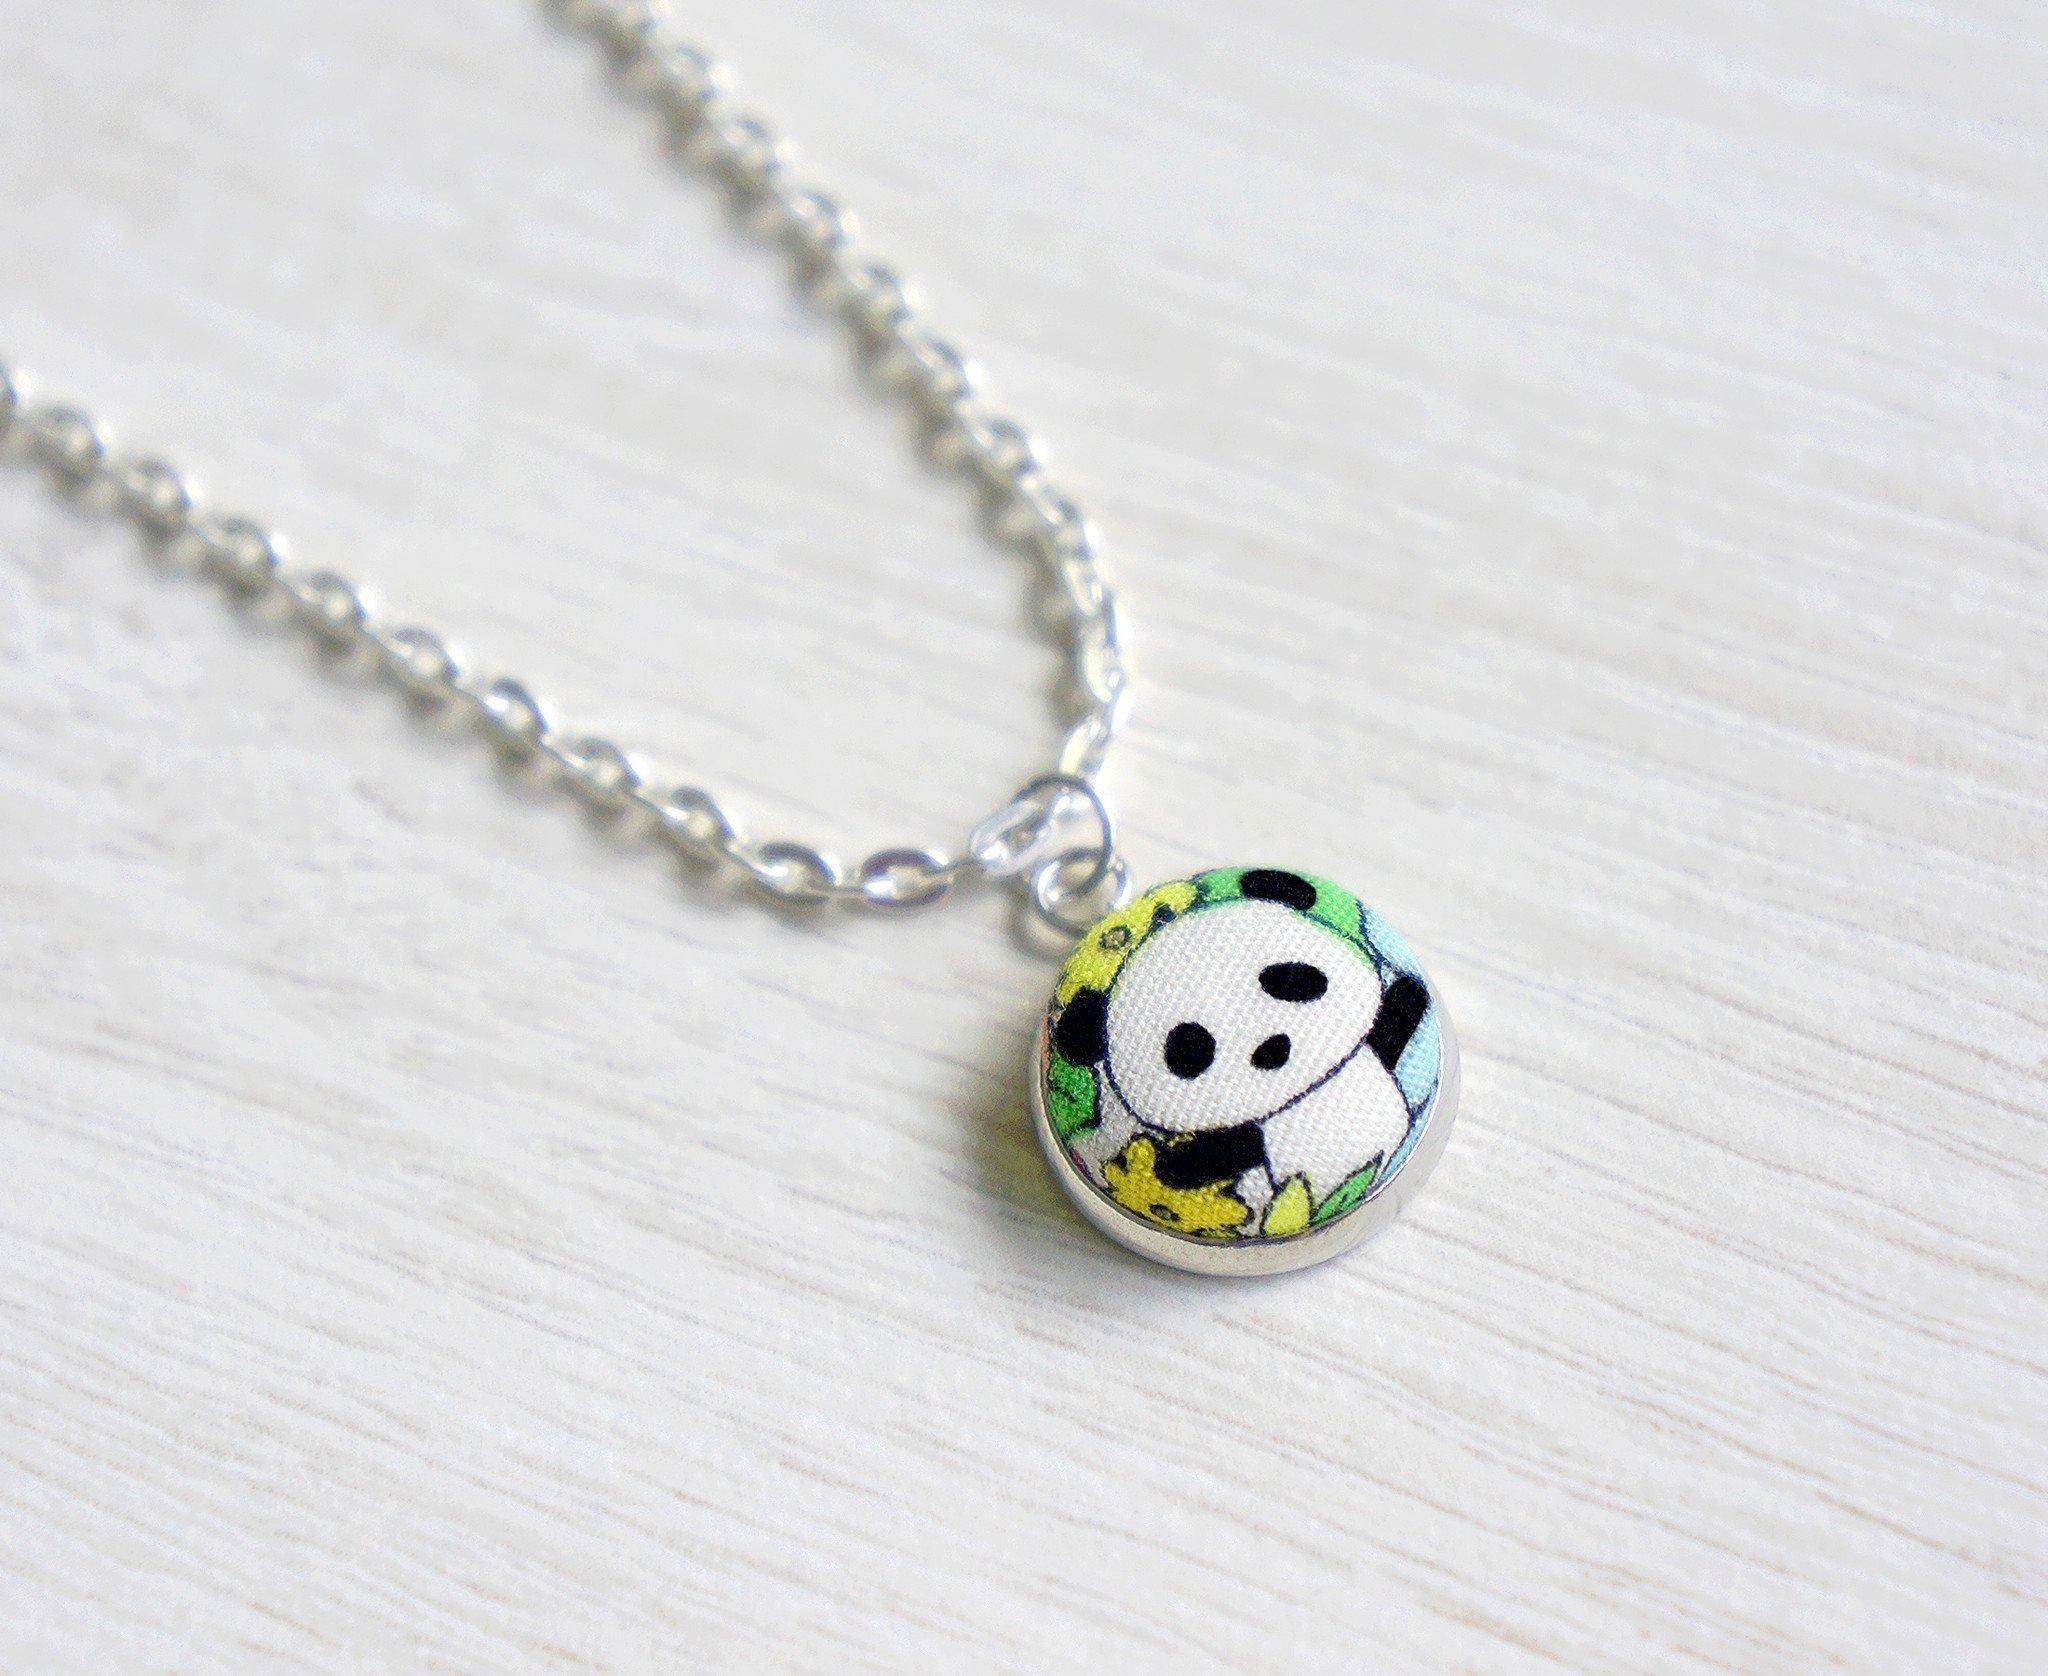 Haruki Panda SM Handmade Fabric Button Necklace - Necklaces - Paperdaise Accessories - Naiise